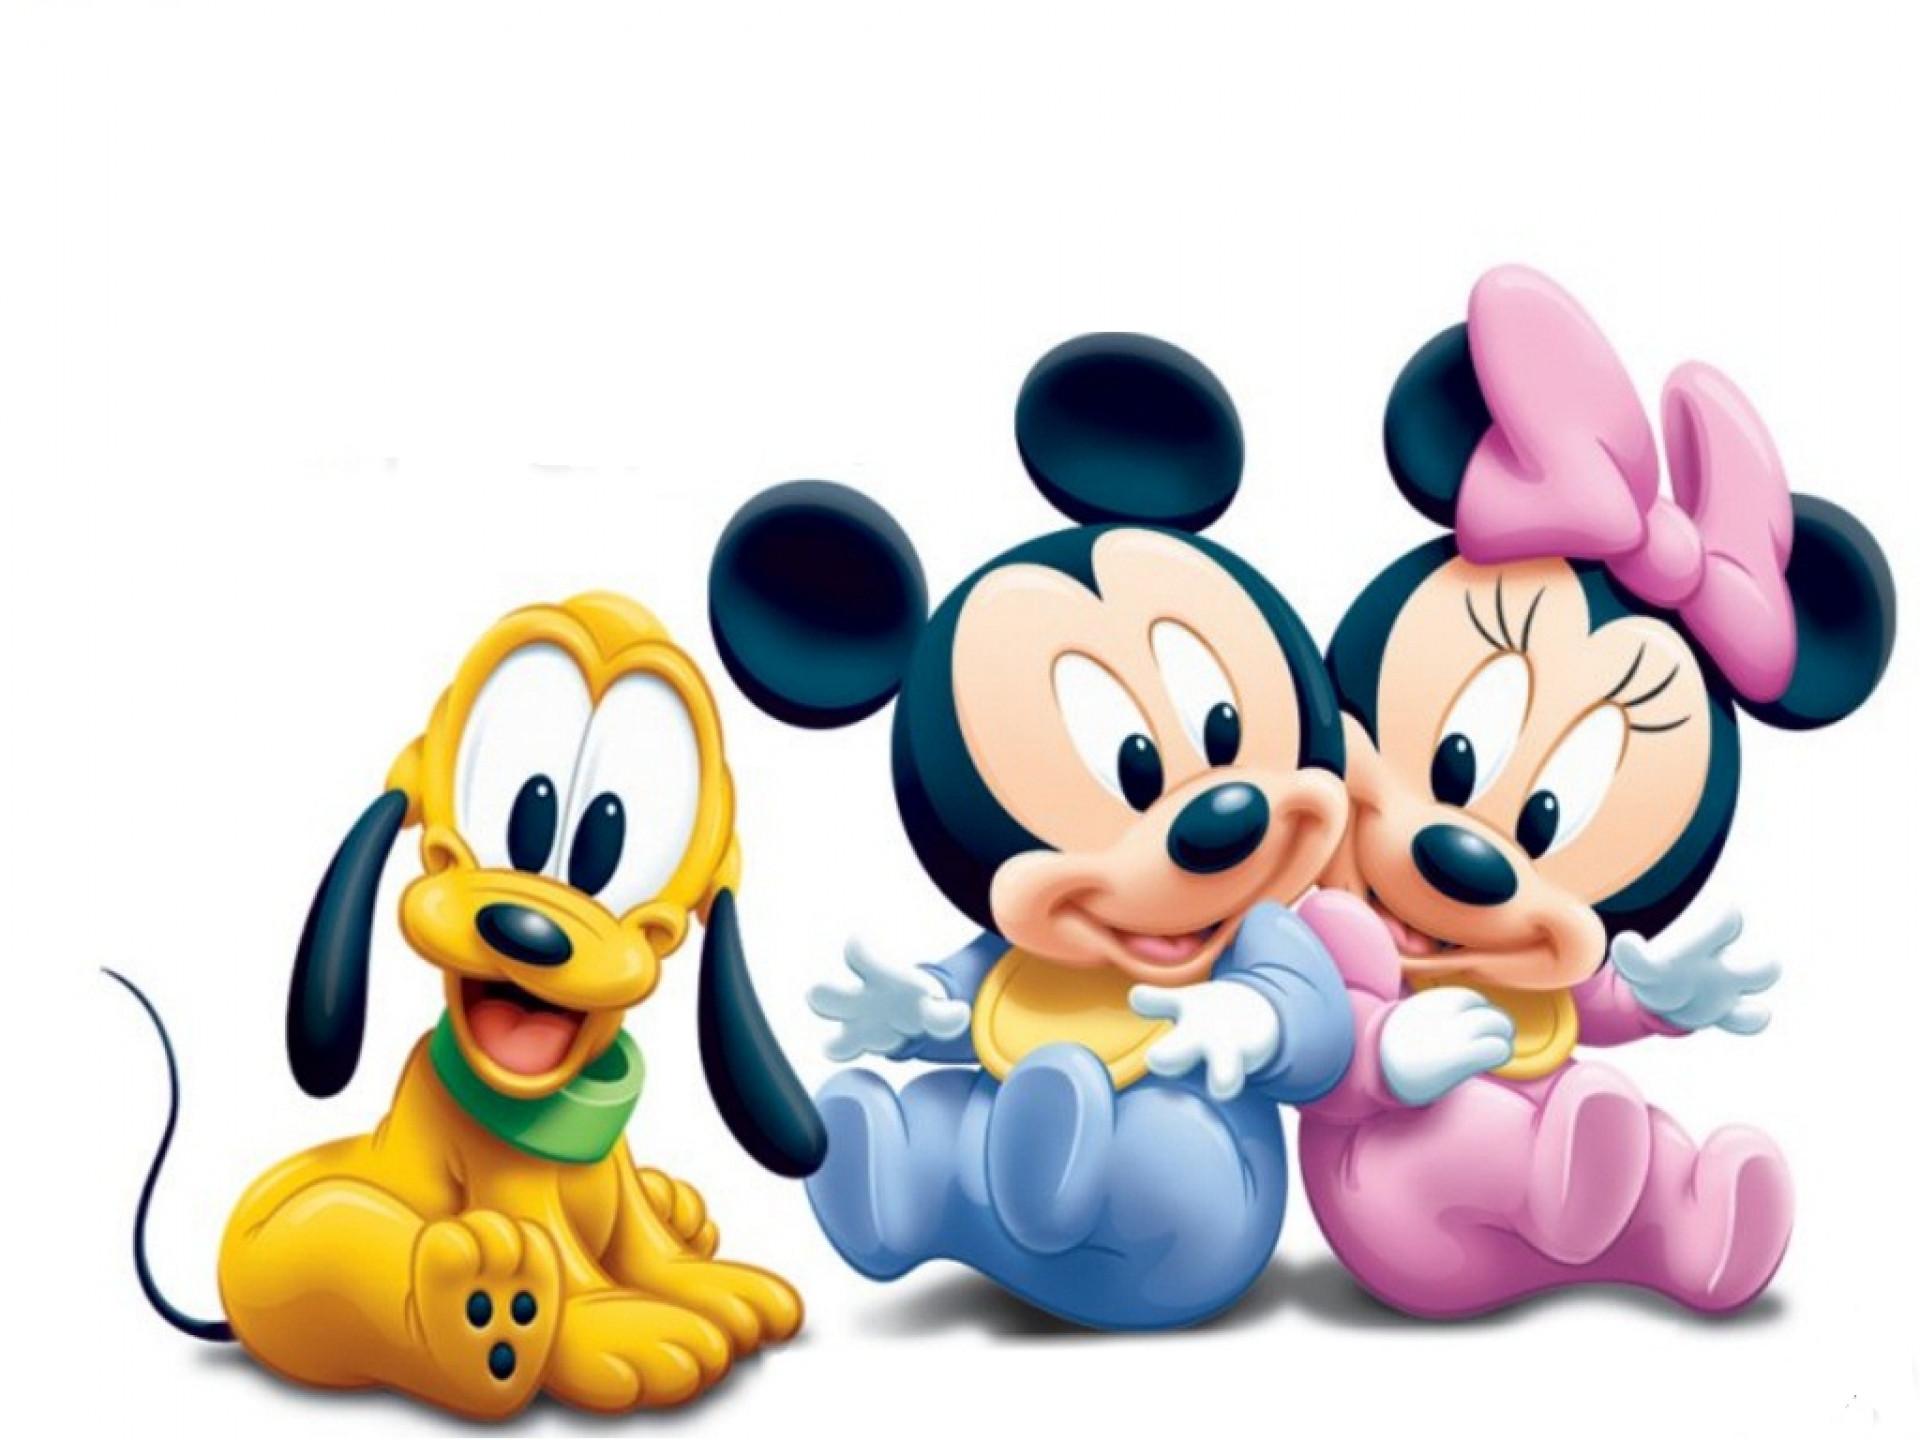 Mickey Mouse characters Image